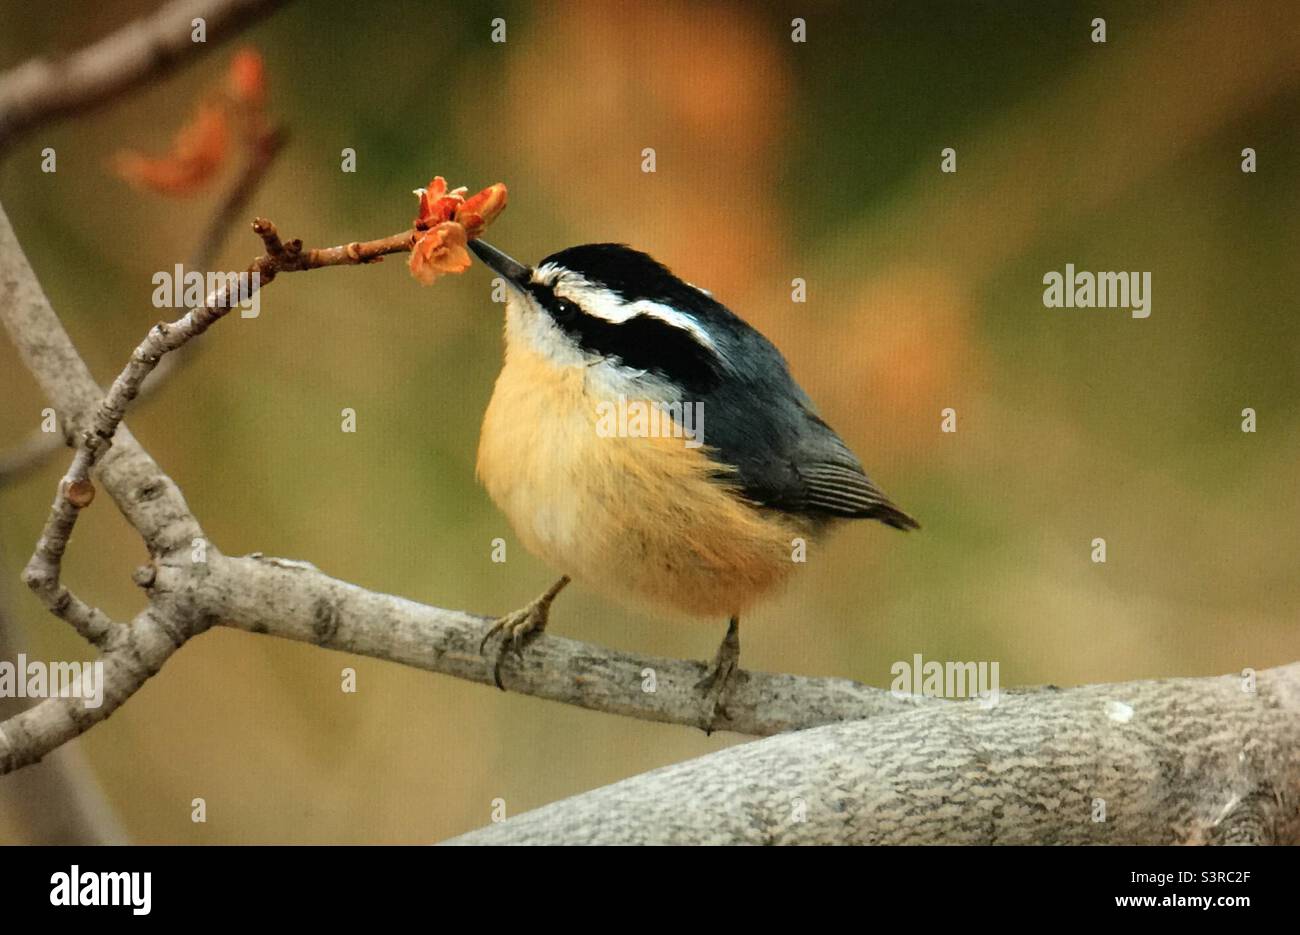 Backyard photography, North American , birds, Red breasted nuthatch, wildlife. Stock Photo